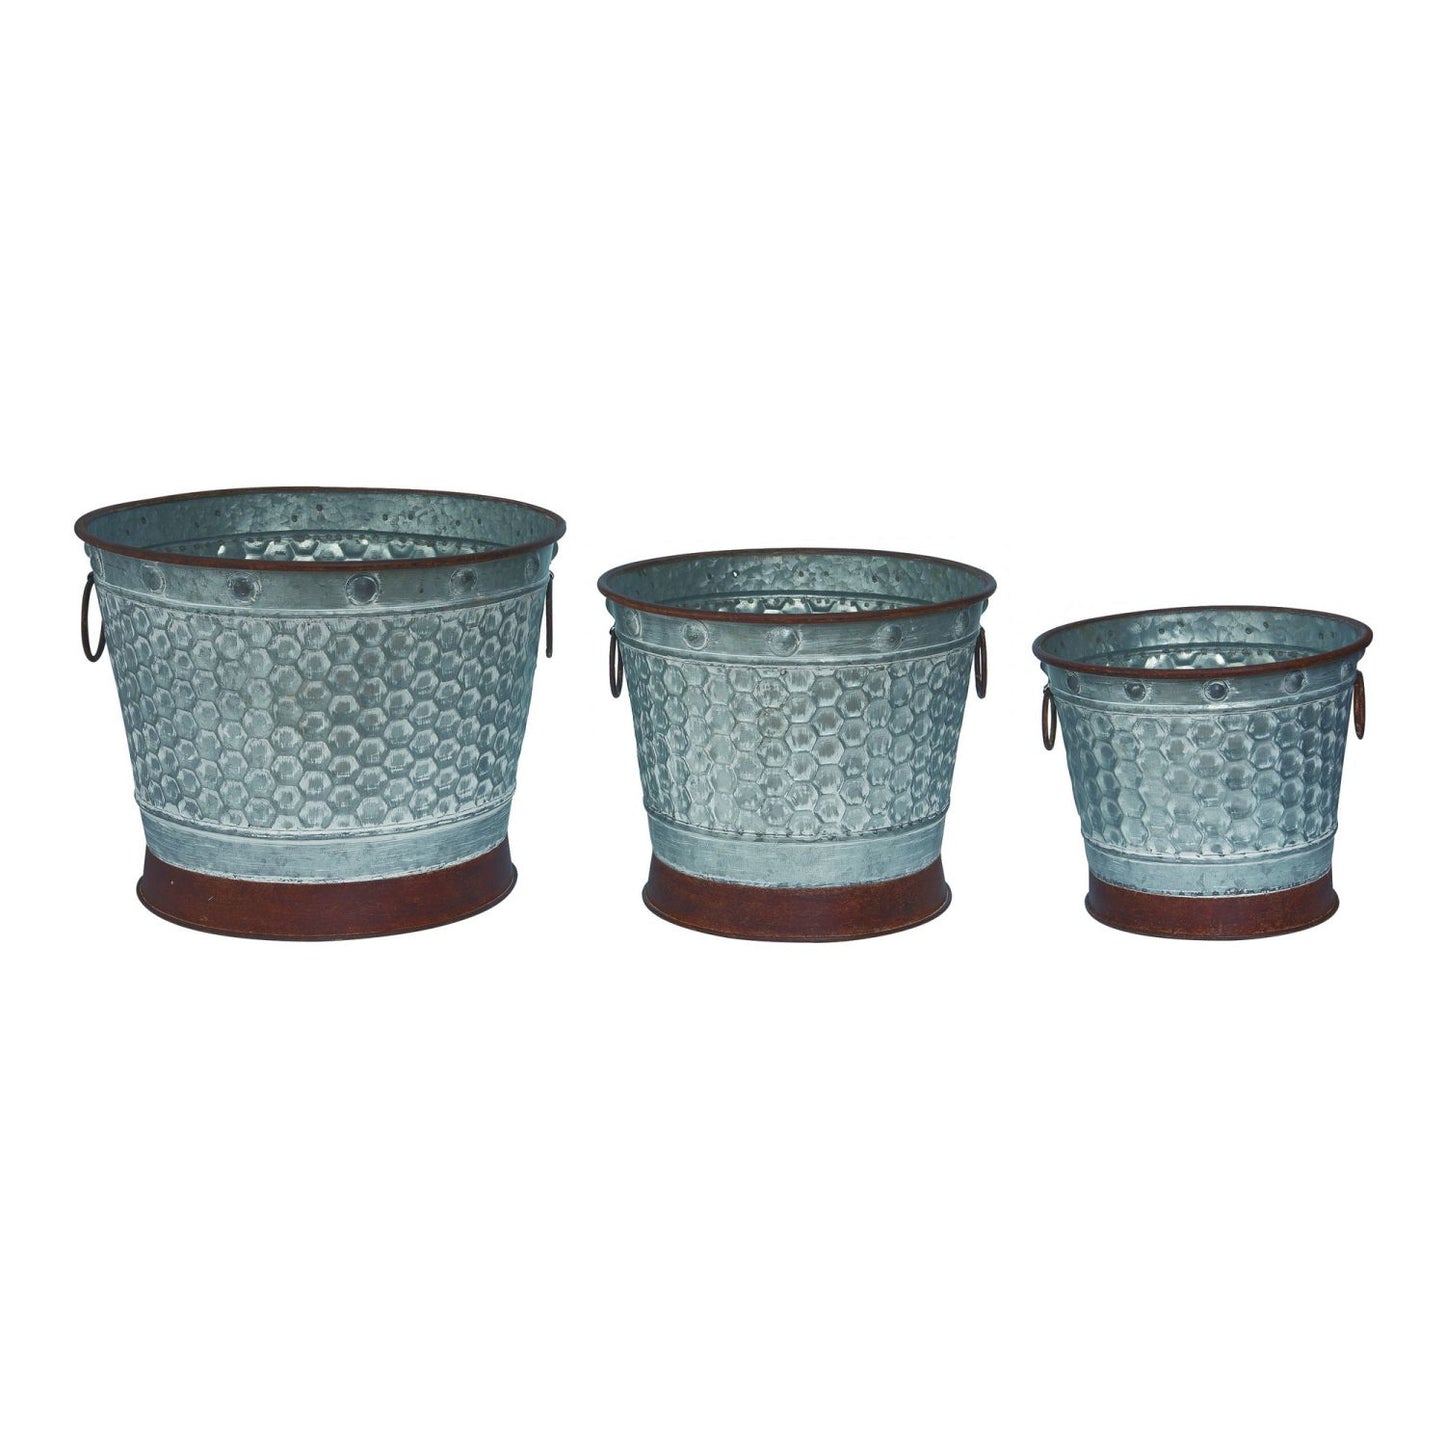 Transpac Metal Honeycomb Planters With Drainage Hole, Set Of 3